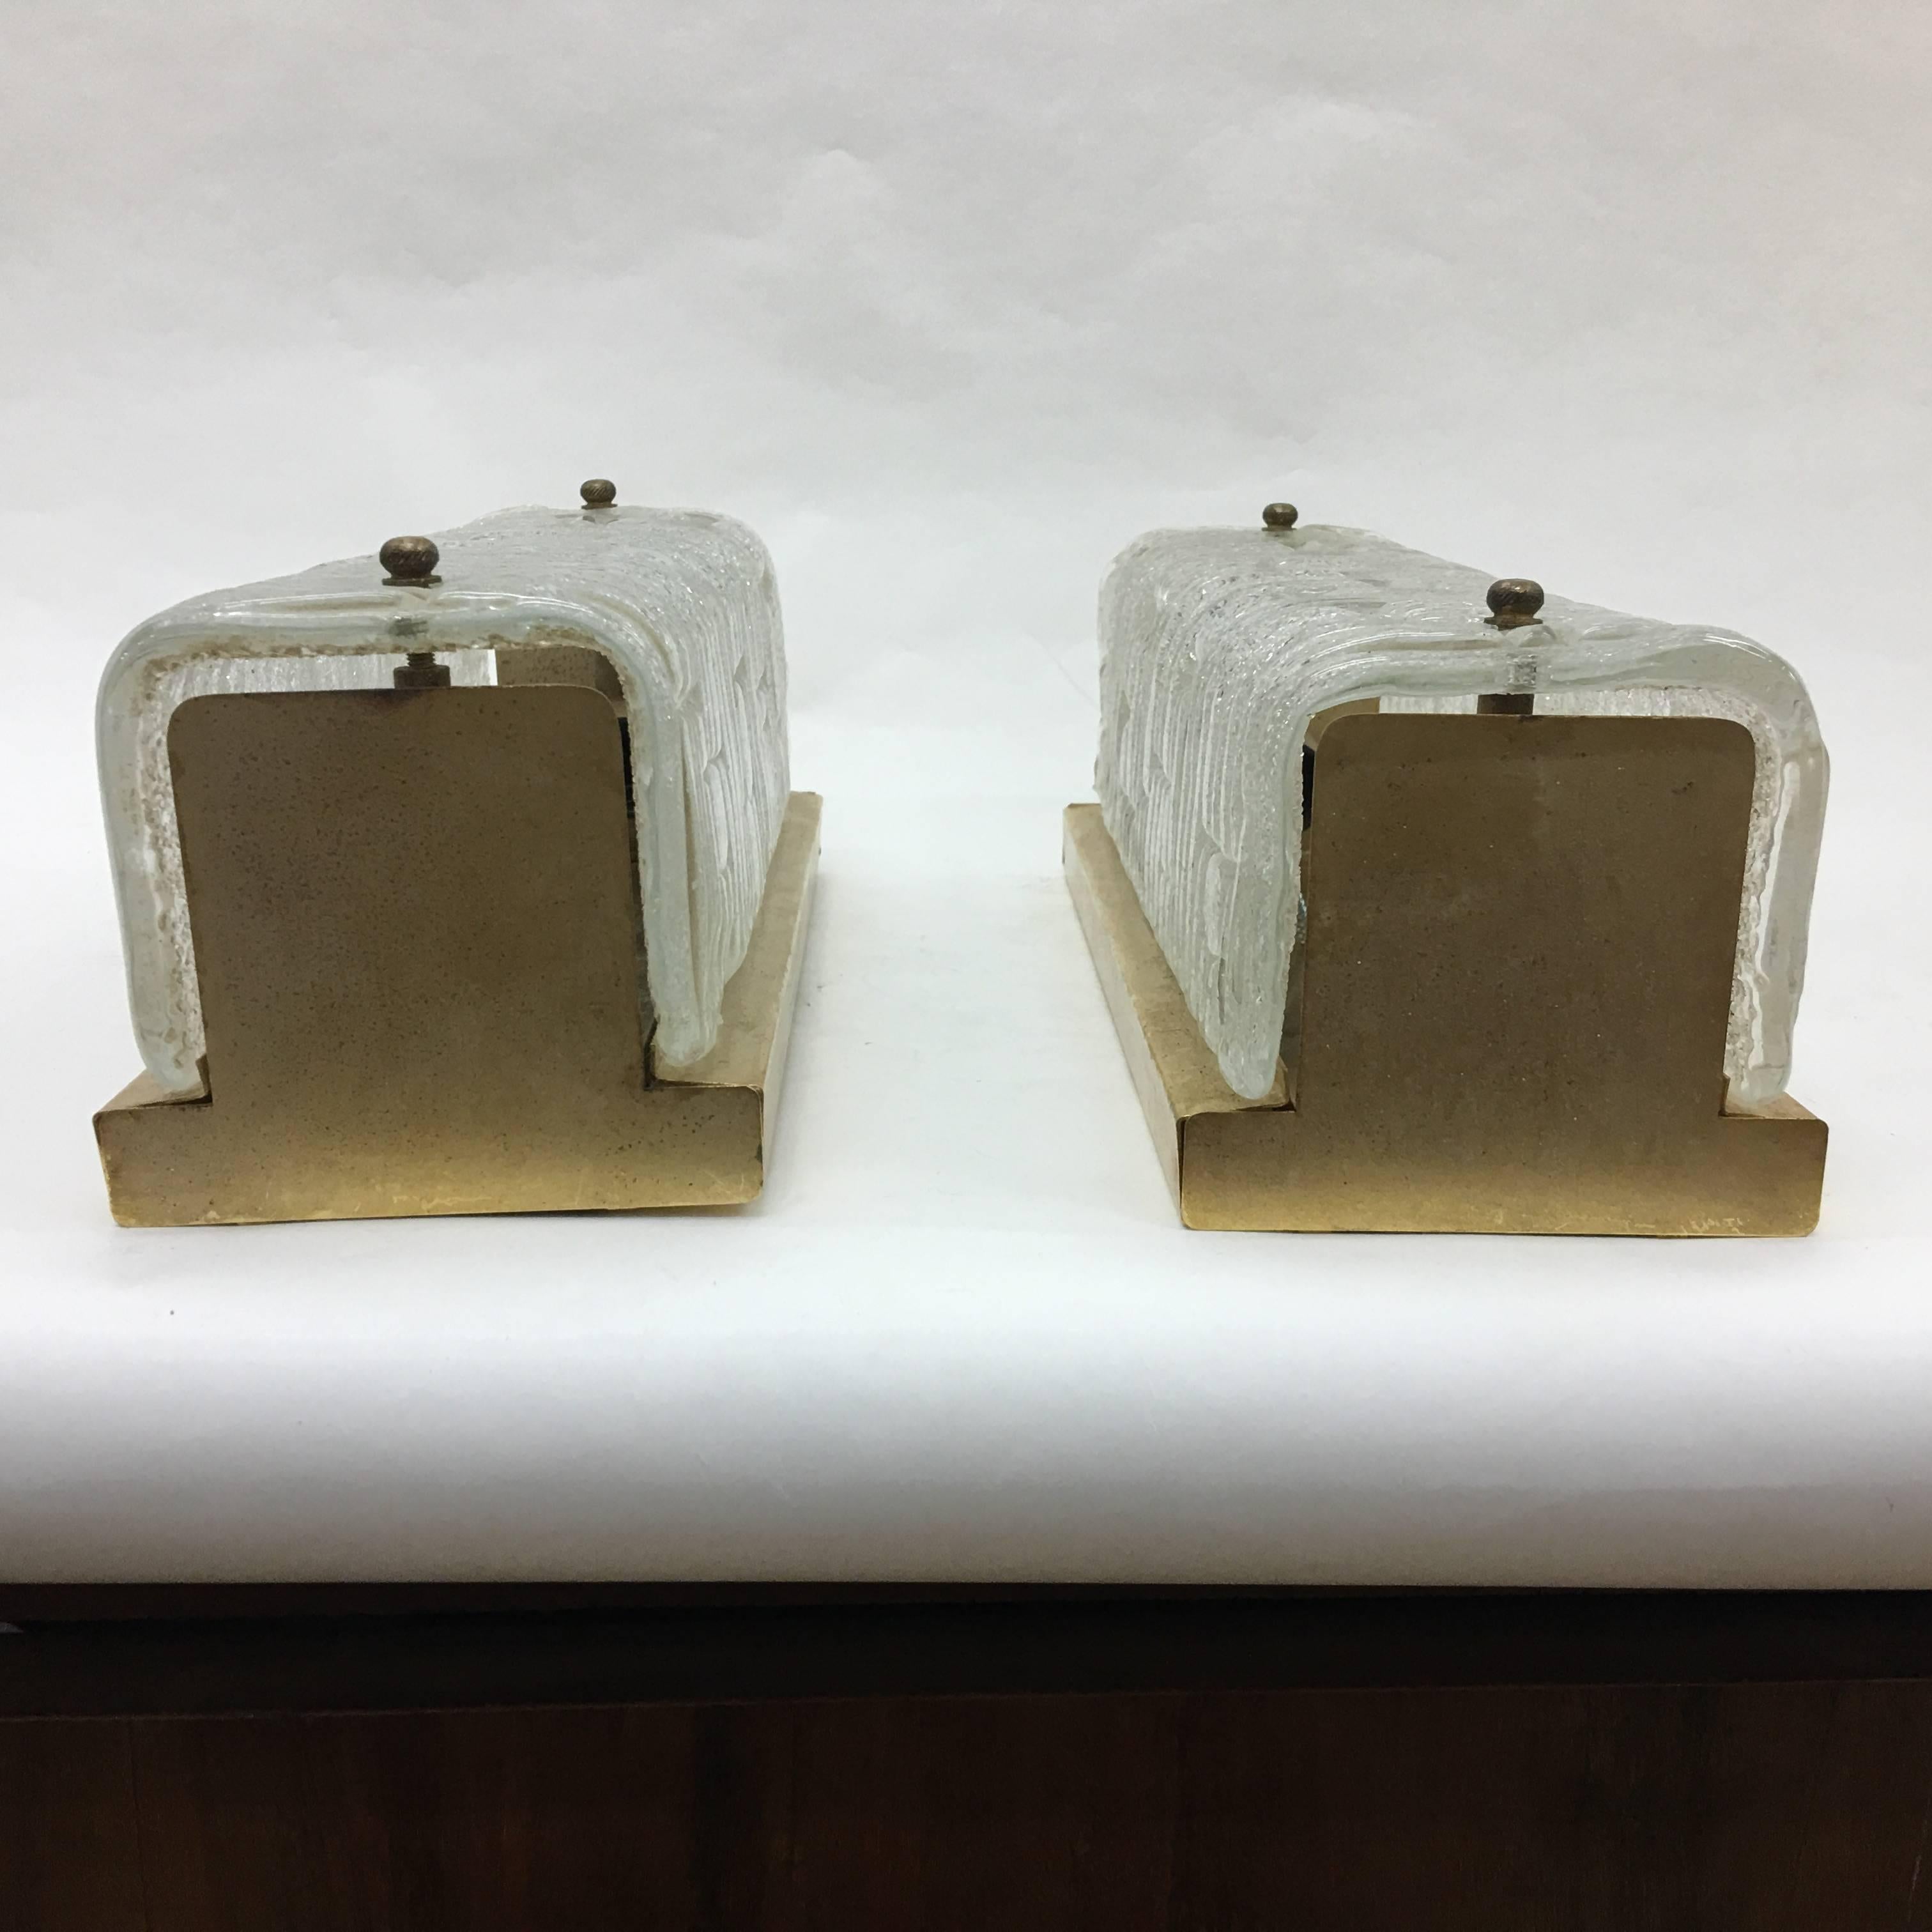 Two brass and Murano glass rectangular wall sconces made in Italy in 1960. They work with 110-240 volts and need regular bulbs. The original patina create a vibrant vintage look.